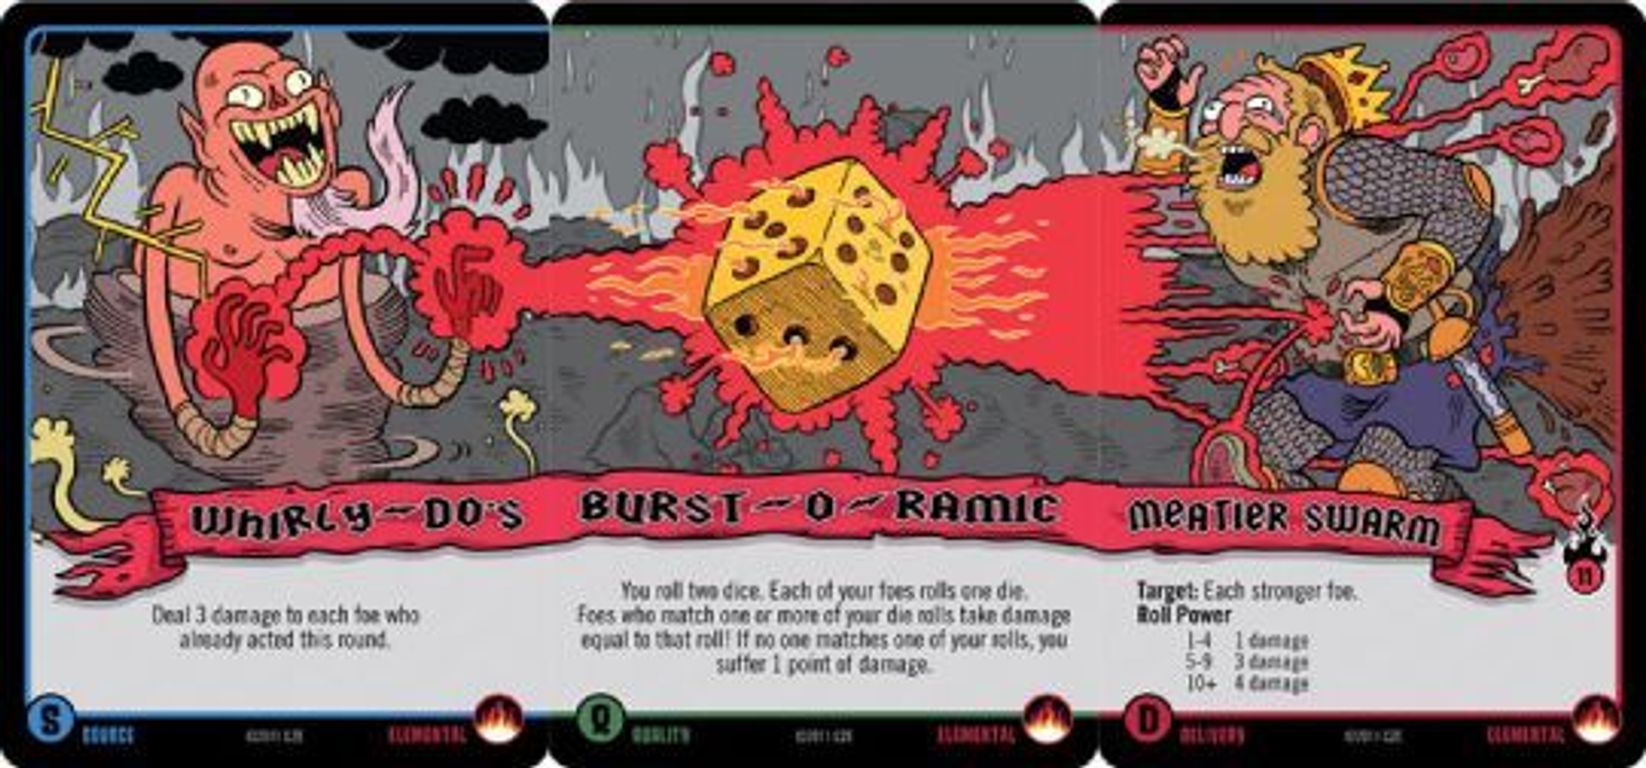 Epic Spell Wars of the Battle Wizards: Duel at Mt. Skullzfyre cartas